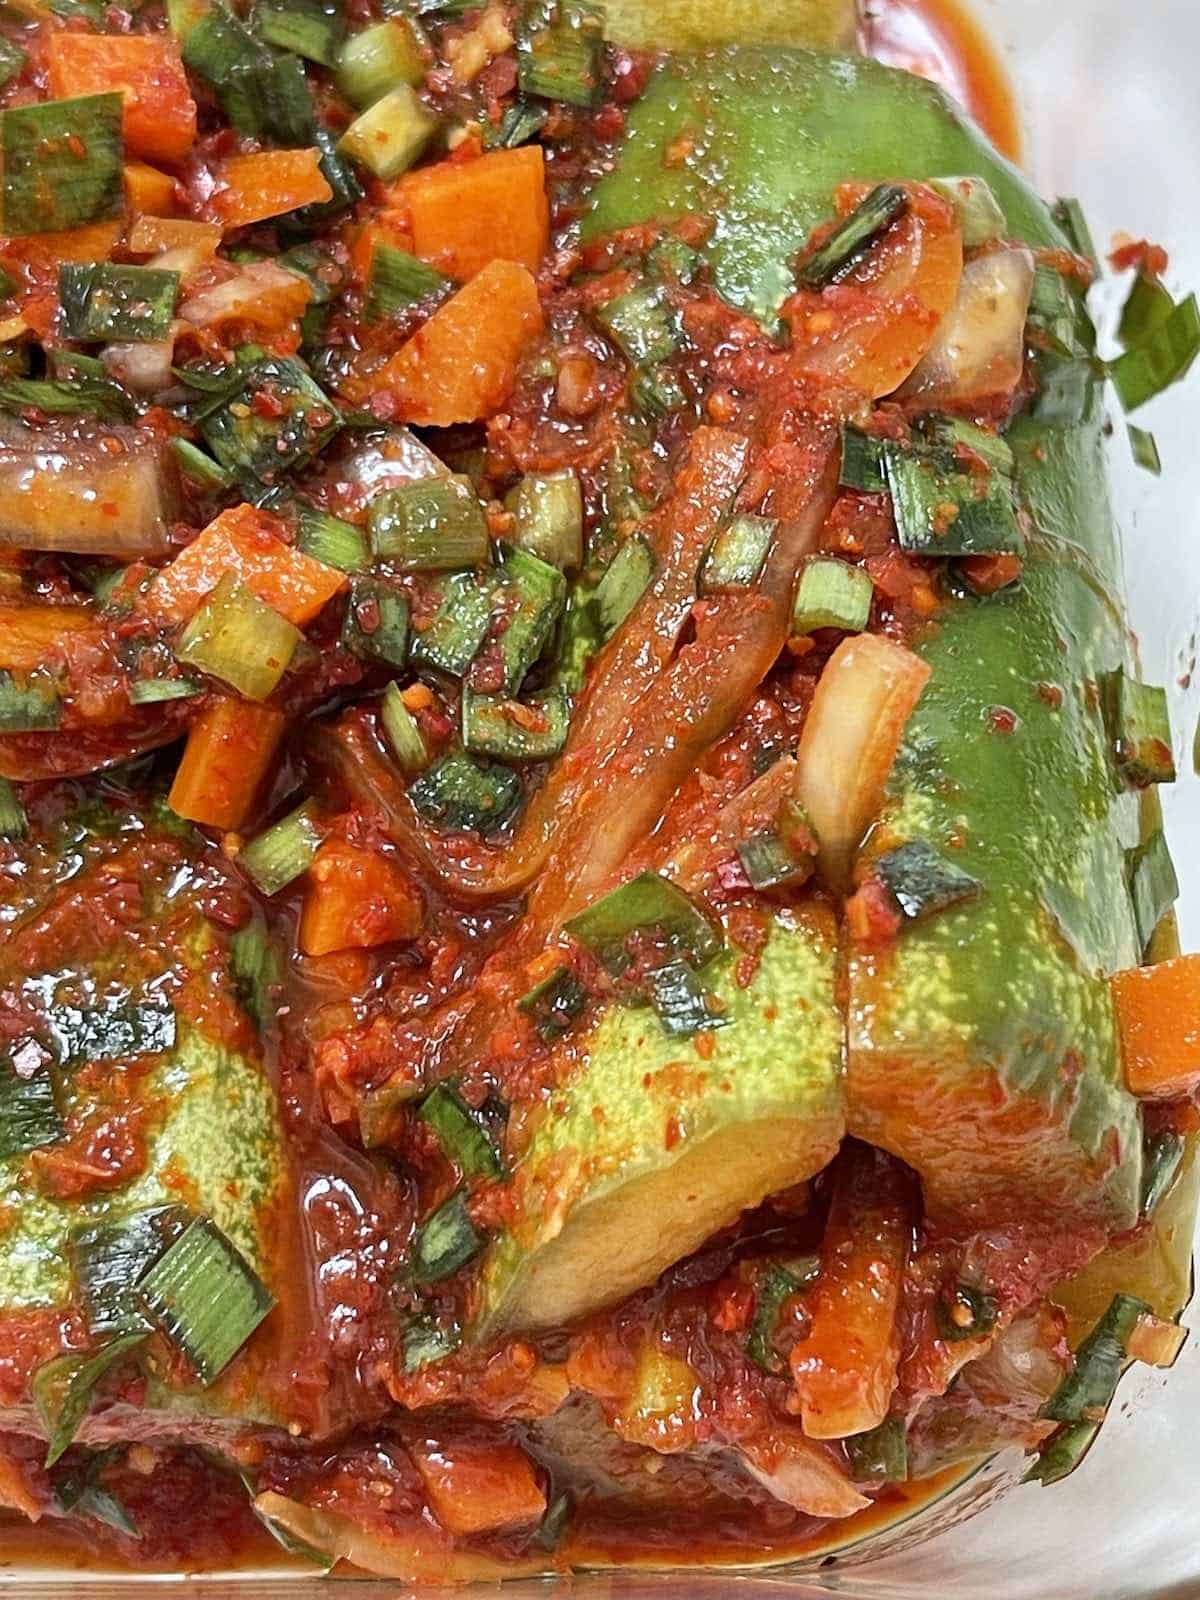 cucumbers covered in red pepper, carrot, onion chives